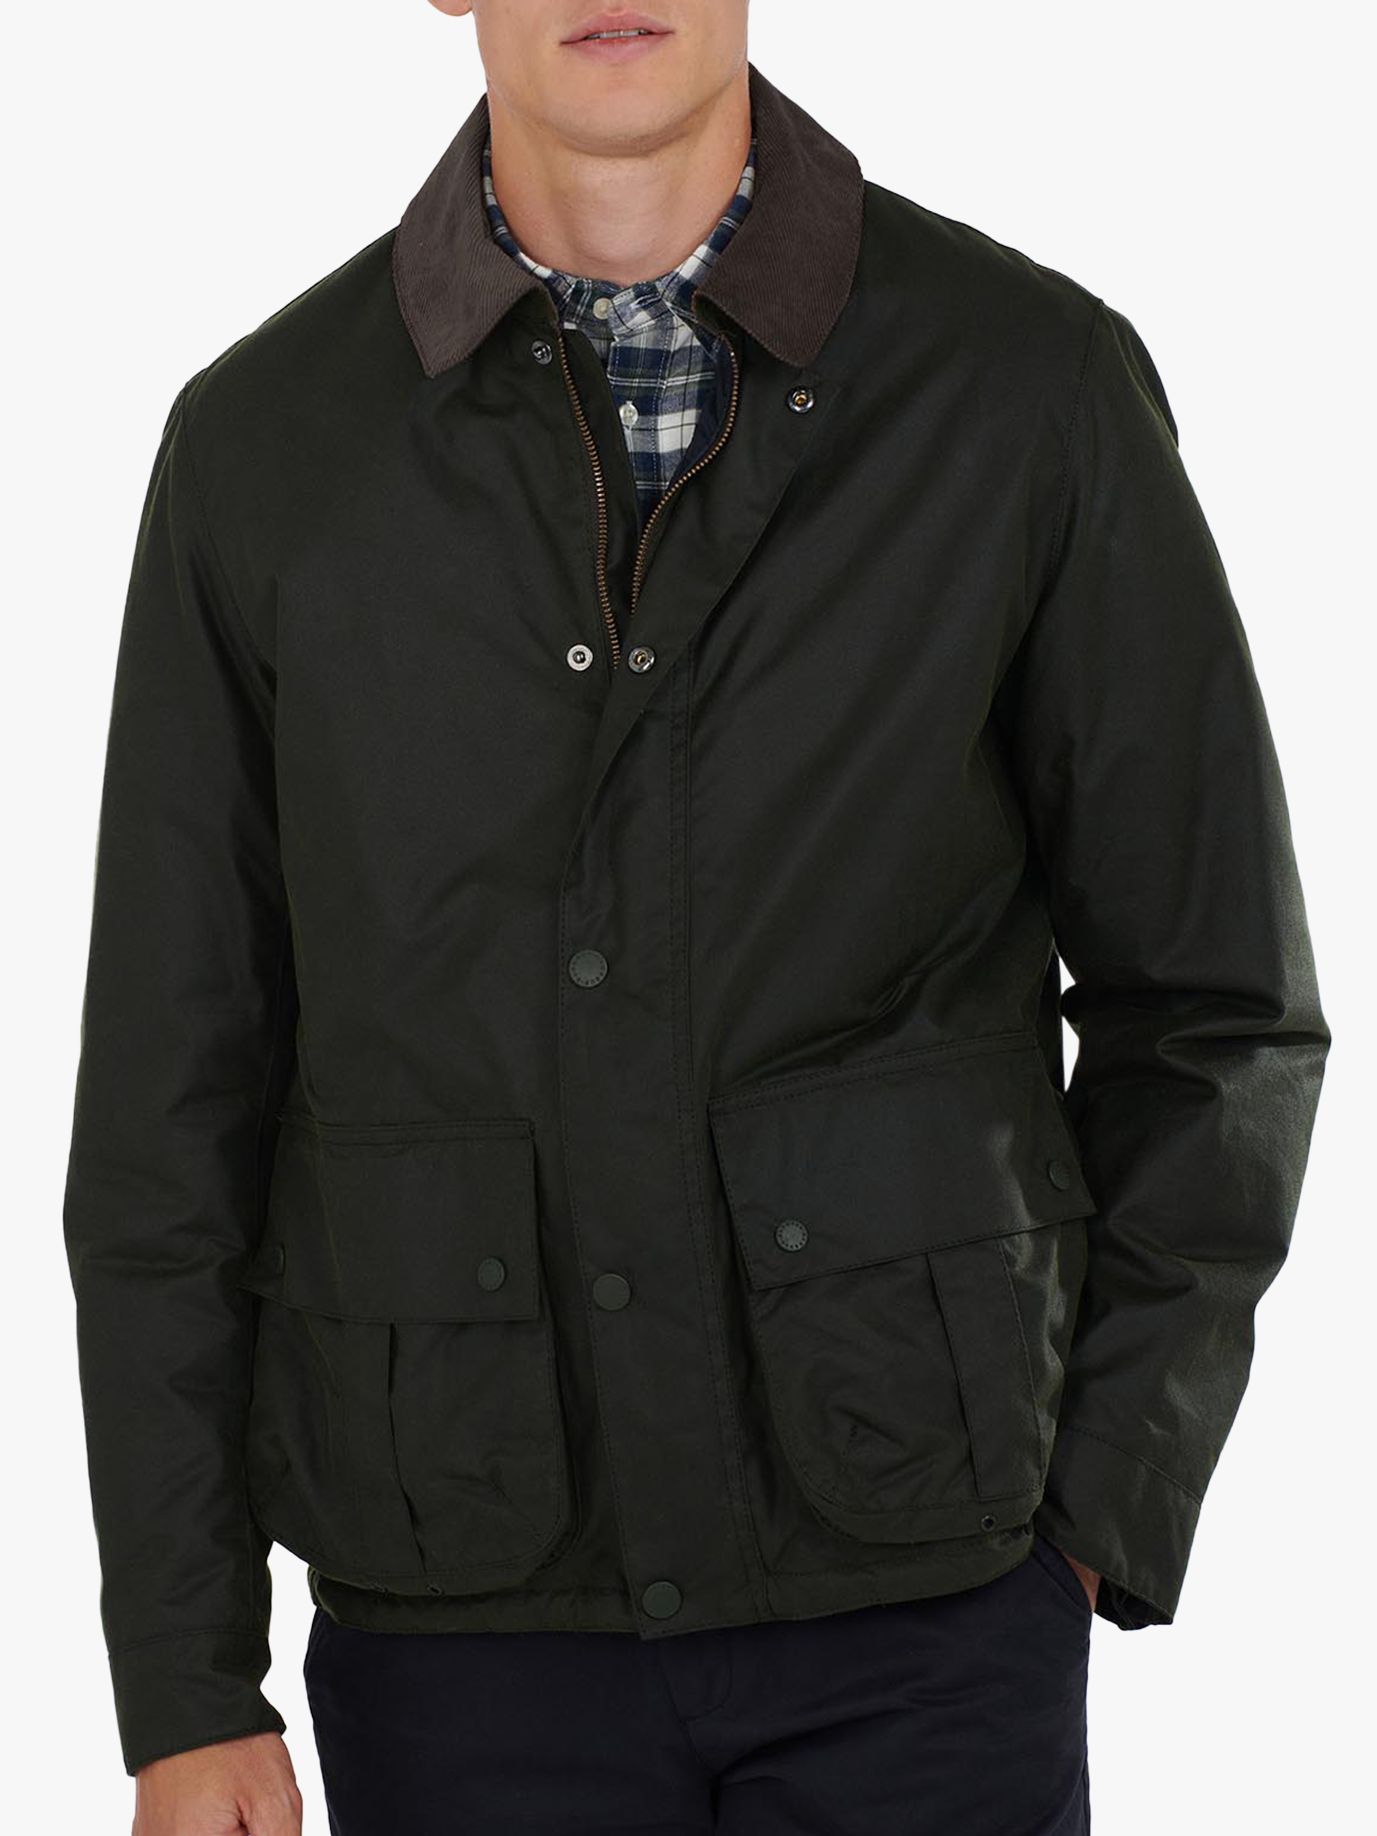 Barbour Allund Short Waxed Jacket, Green at John Lewis & Partners